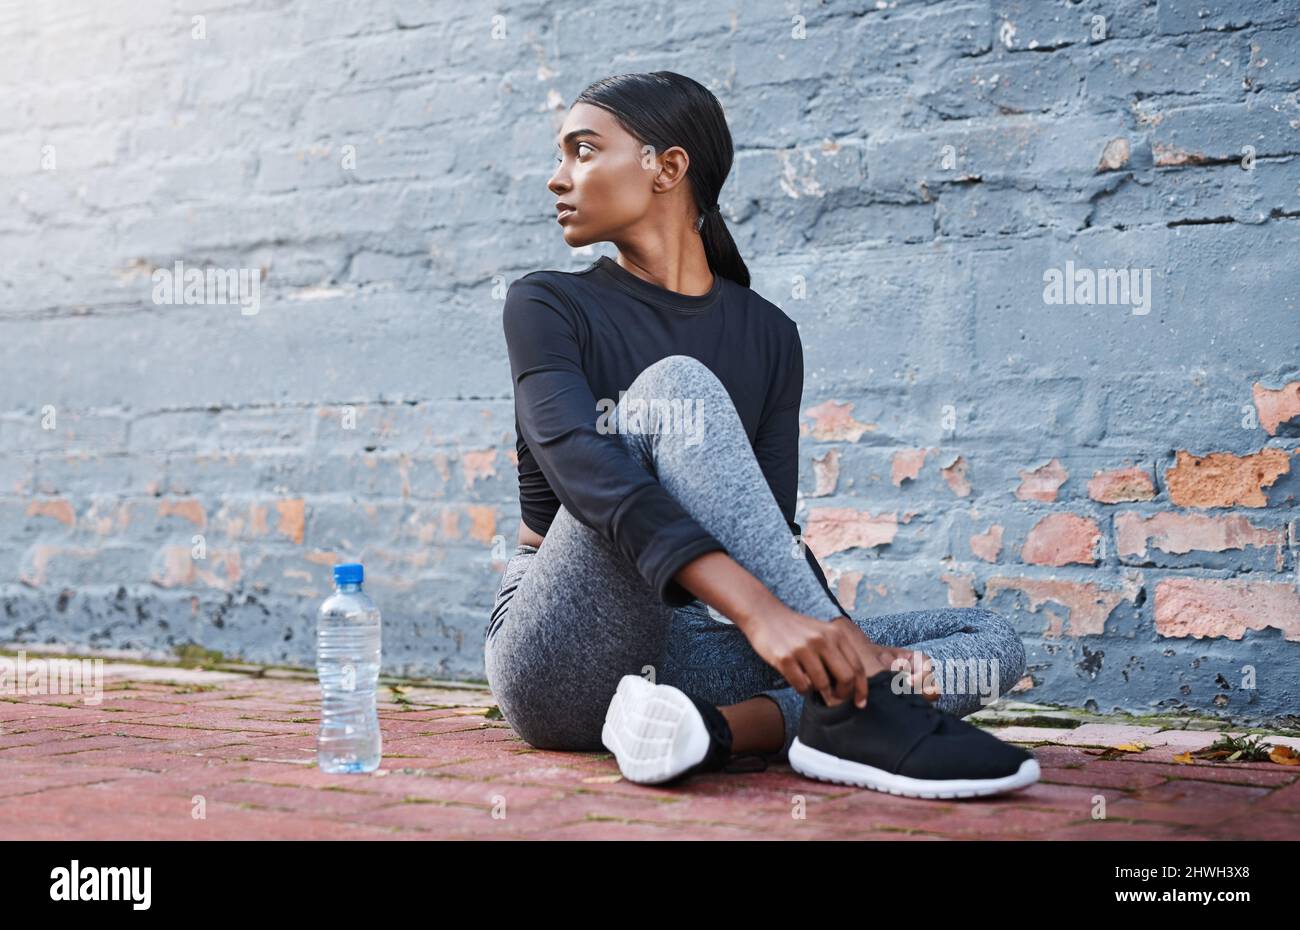 Another day, another fitness goal to slay. Shot of a young woman tying her shoelaces before a workout session. Stock Photo